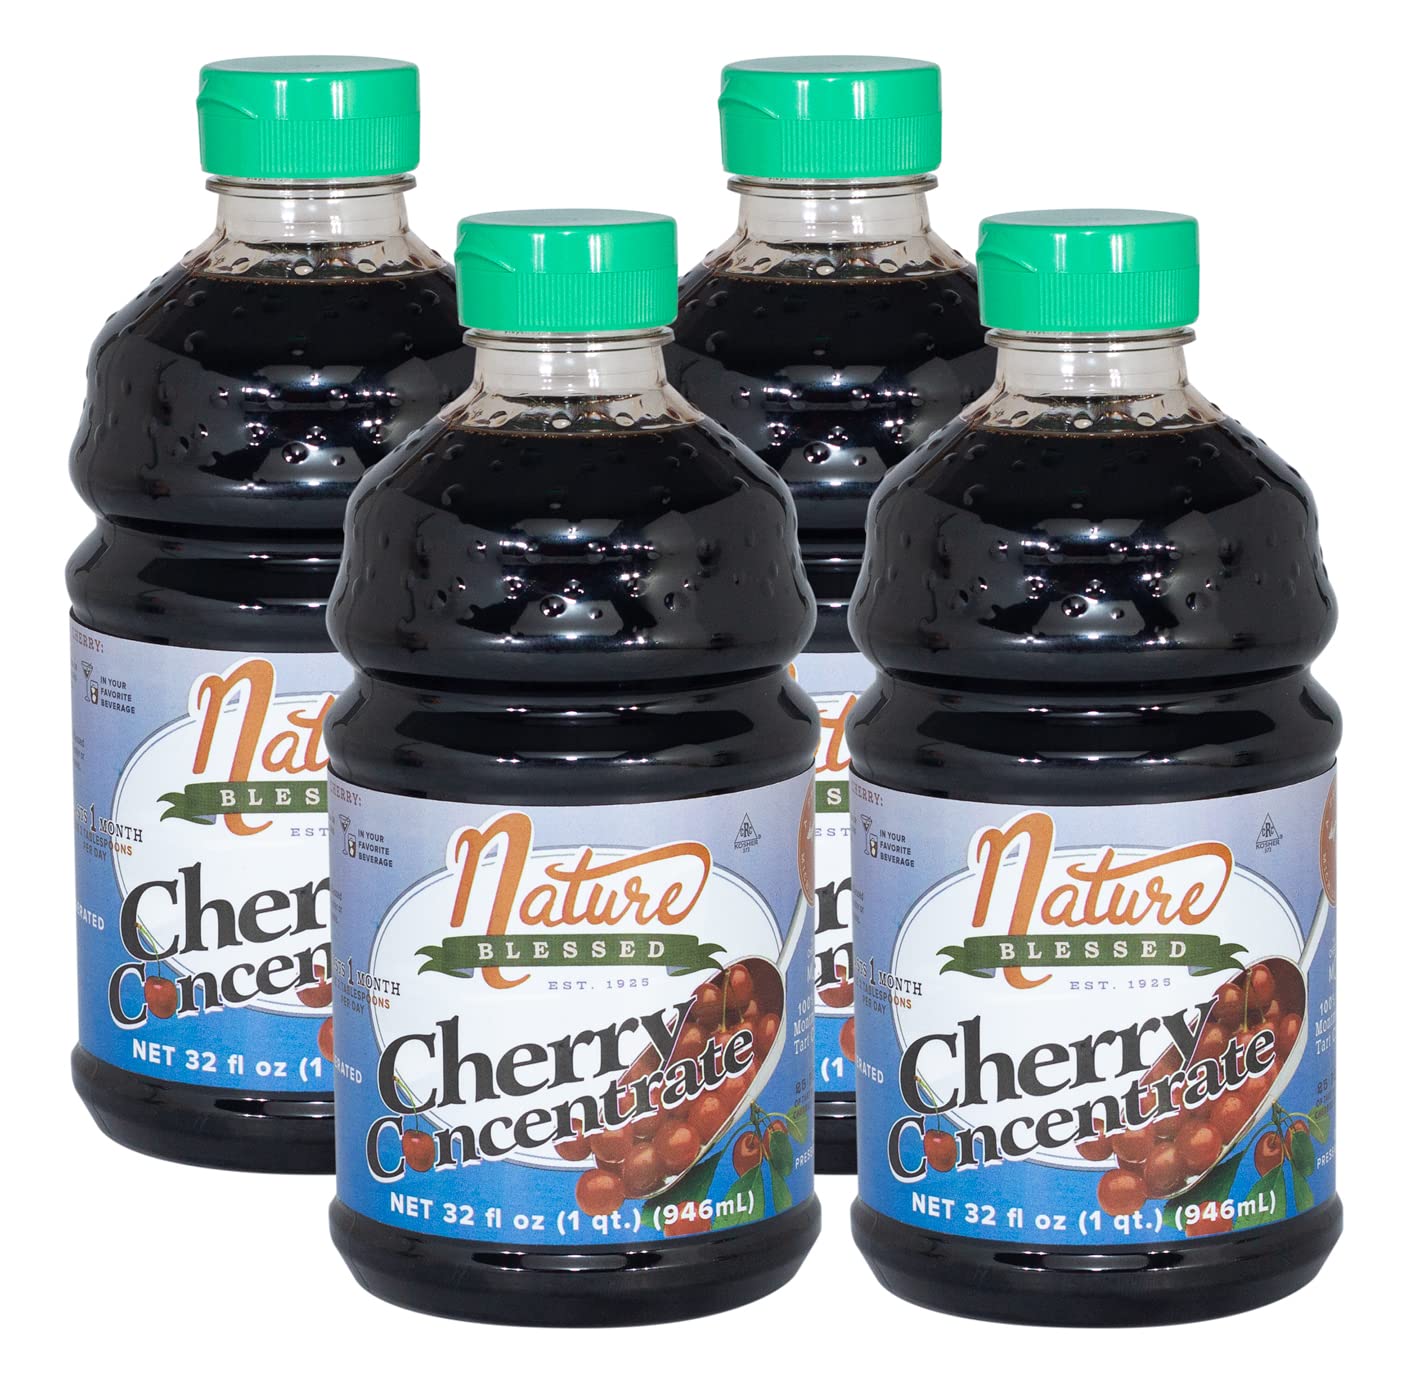 Nature Blessed 100% Pure Tart cherry concentrate - 4 Quarts (Four 32oz Bottles), Refreshing Drink or in Smoothie, All Natural, N